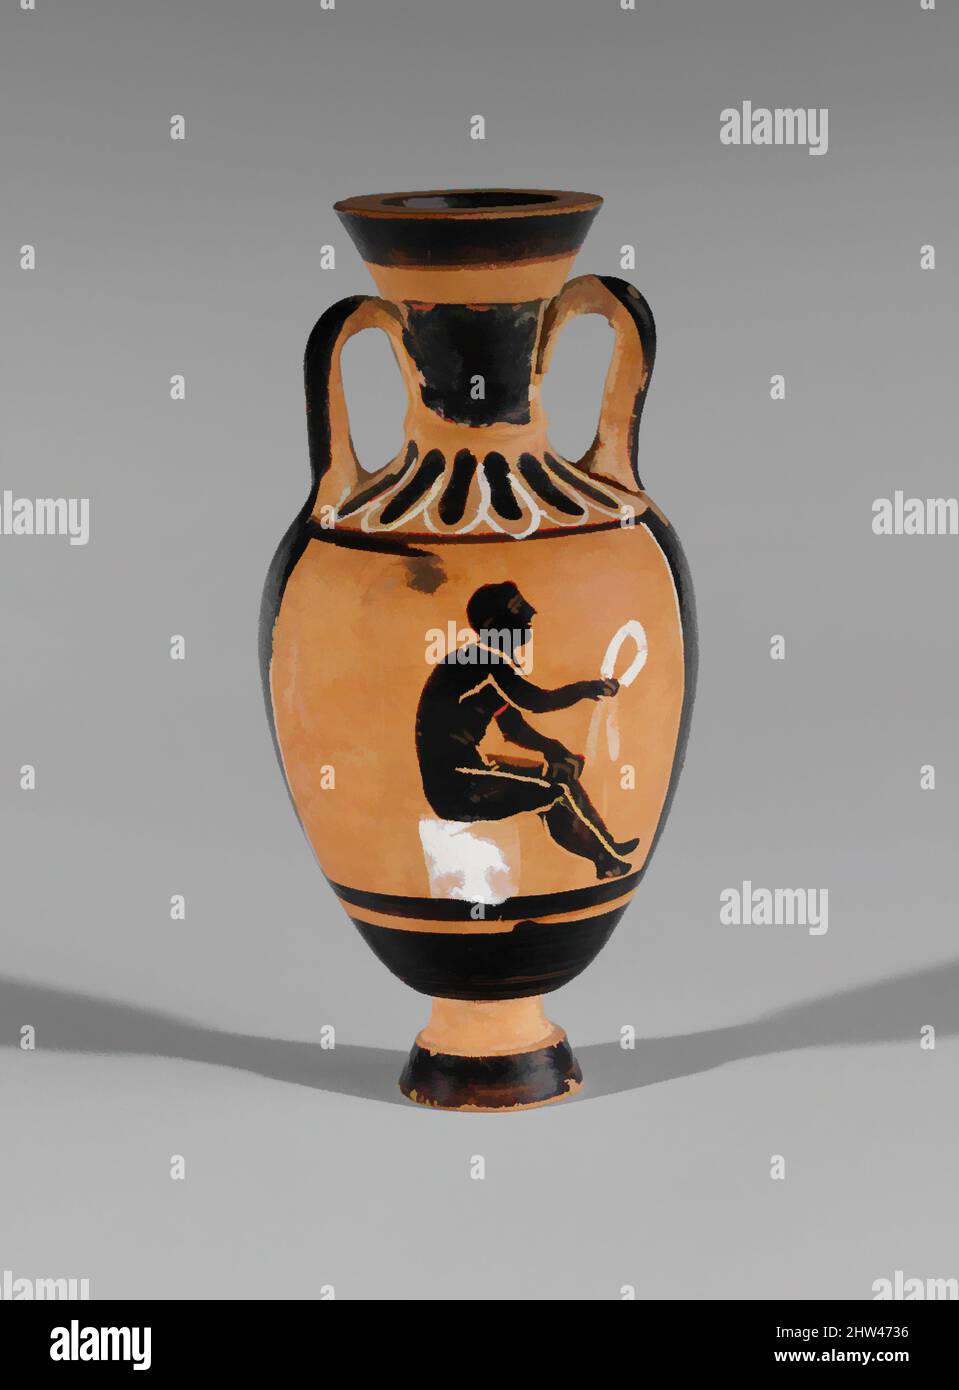 Art inspired by Terracotta miniature Panathenaic amphora, Classical, ca. 400 B.C., Greek, Attic, Terracotta; black-figure, H.: 3 5/16 in. (8.4 cm), Vases, Obverse, Athena, Reverse, seated athlete. The Bulas Group specialized in miniature versions of Panathenaic prize amphorae. The, Classic works modernized by Artotop with a splash of modernity. Shapes, color and value, eye-catching visual impact on art. Emotions through freedom of artworks in a contemporary way. A timeless message pursuing a wildly creative new direction. Artists turning to the digital medium and creating the Artotop NFT Stock Photo